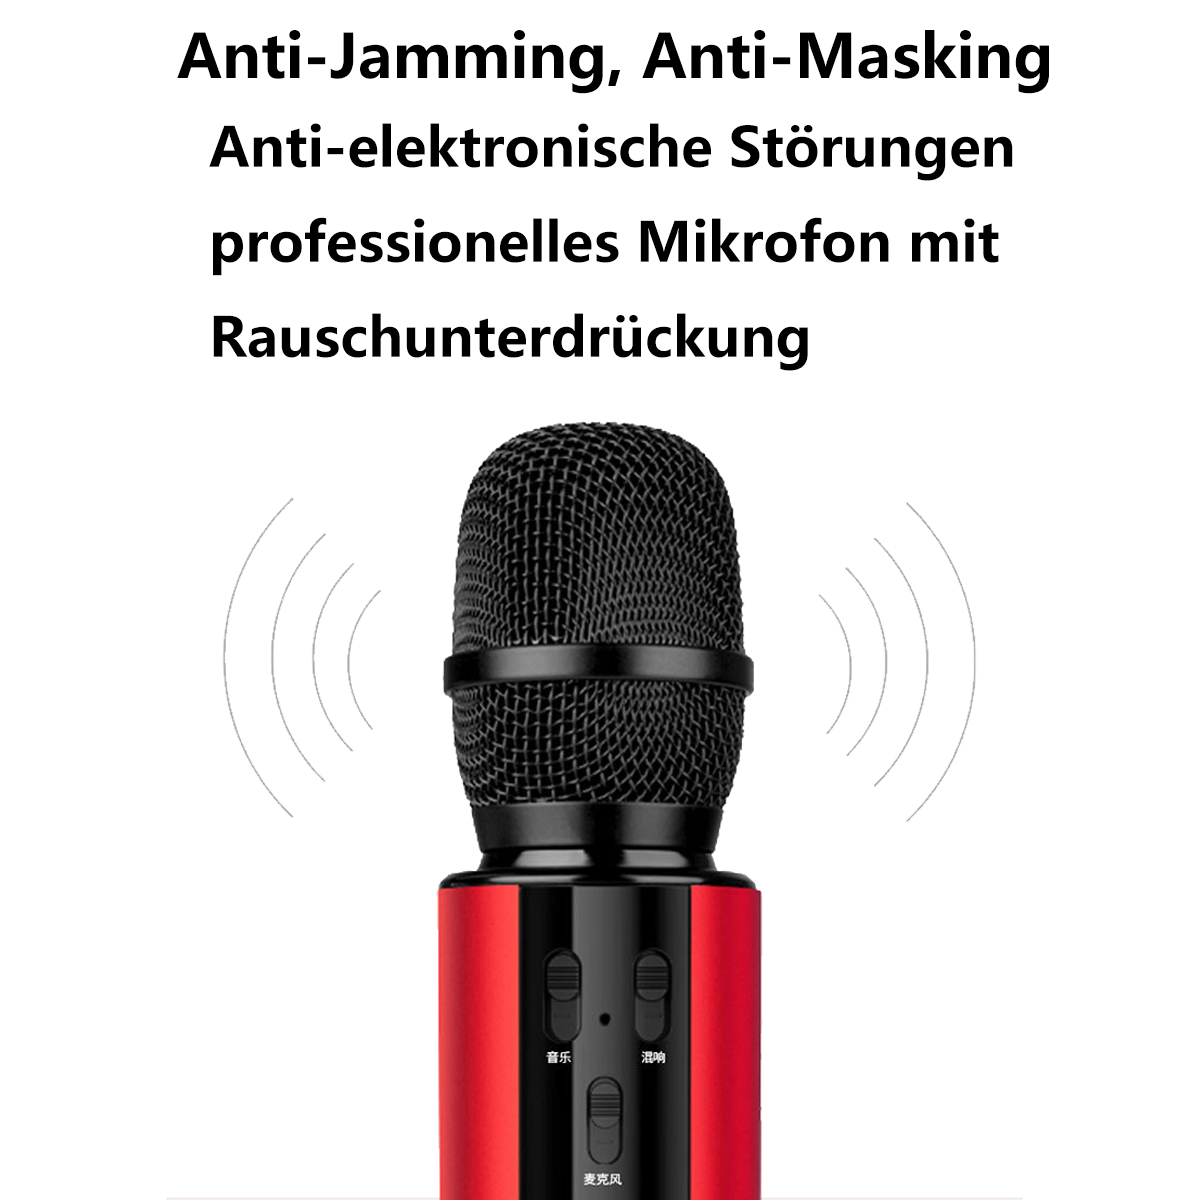 Drahtloses SYNTEK kapazitives All-in-One Audio-Mikrofon Mikrofon Mikrofon Mikrofon Bluetooth Schwarz